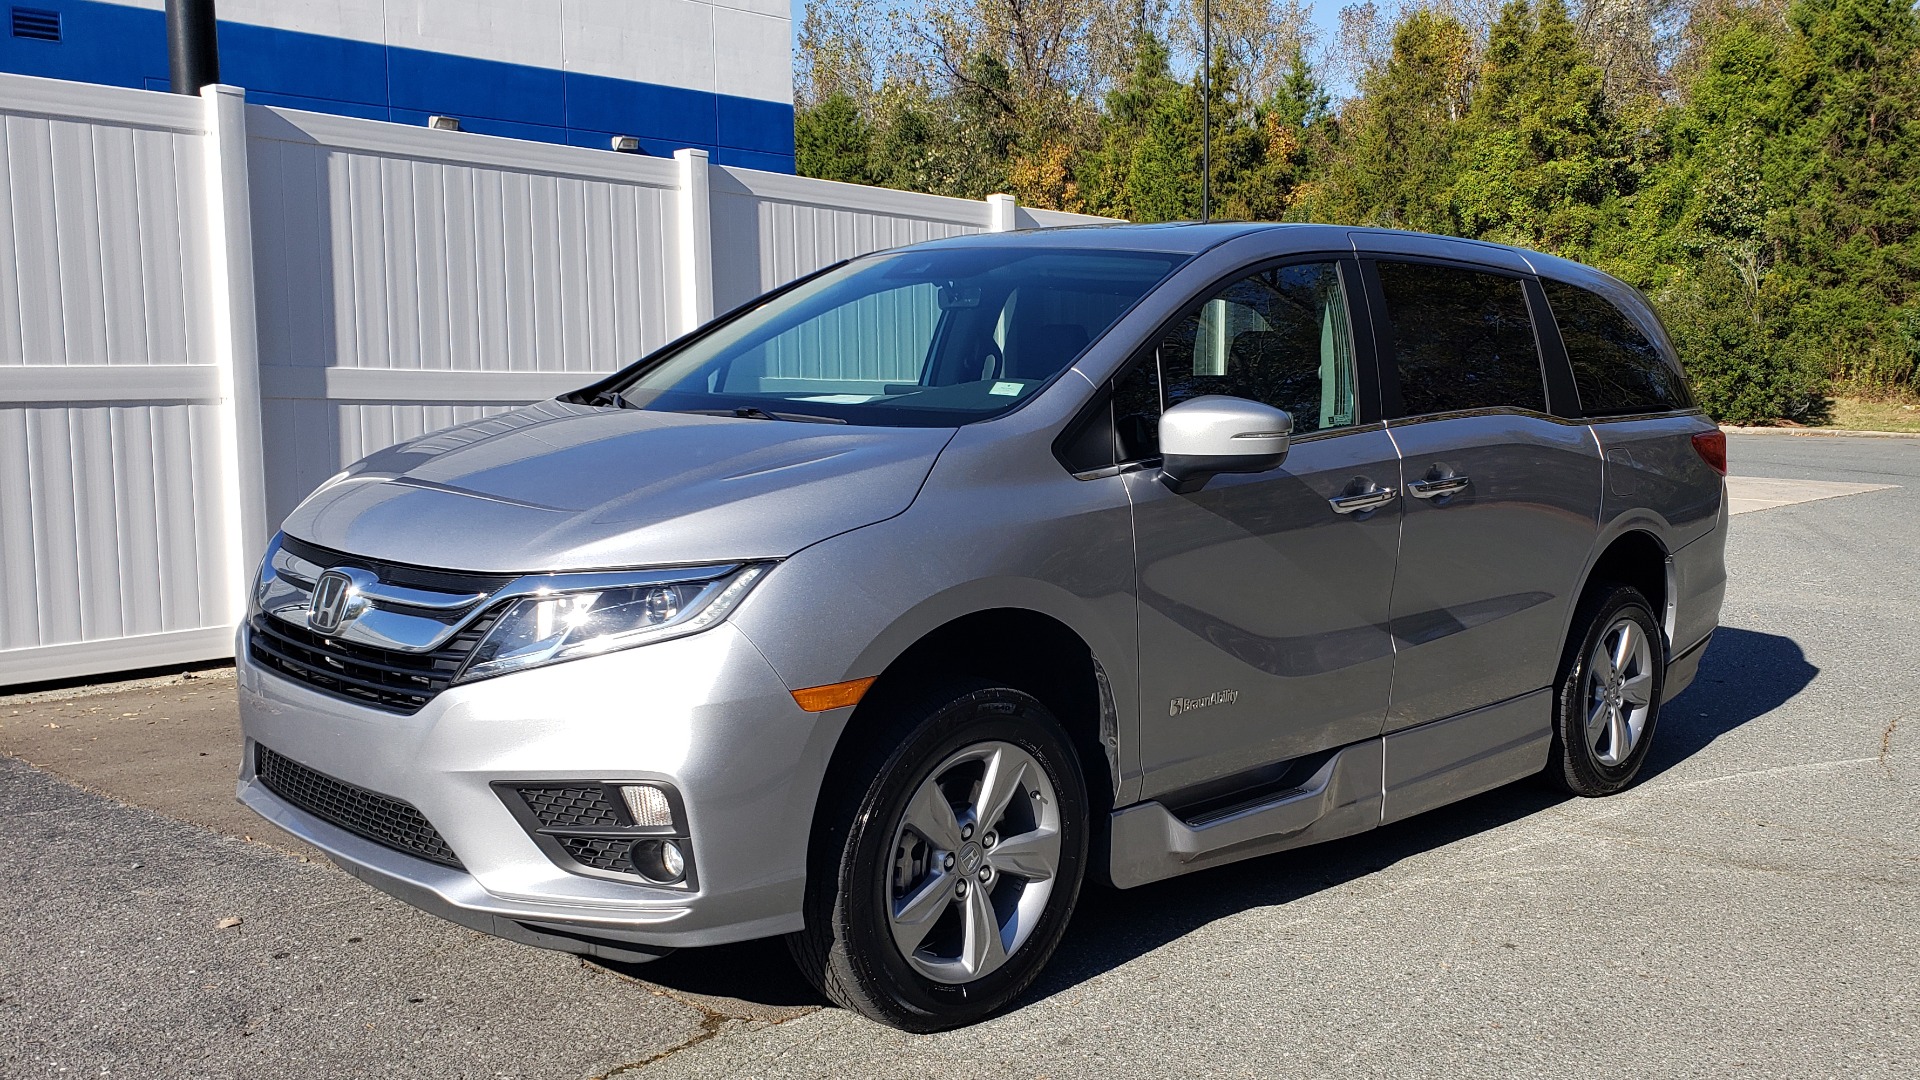 Used 2019 Honda ODYSSEY EX-L BRAUNABILITY / NAV / RES / LKA / BLUE-RAY / SUNROOF / REARVIEW for sale Sold at Formula Imports in Charlotte NC 28227 1